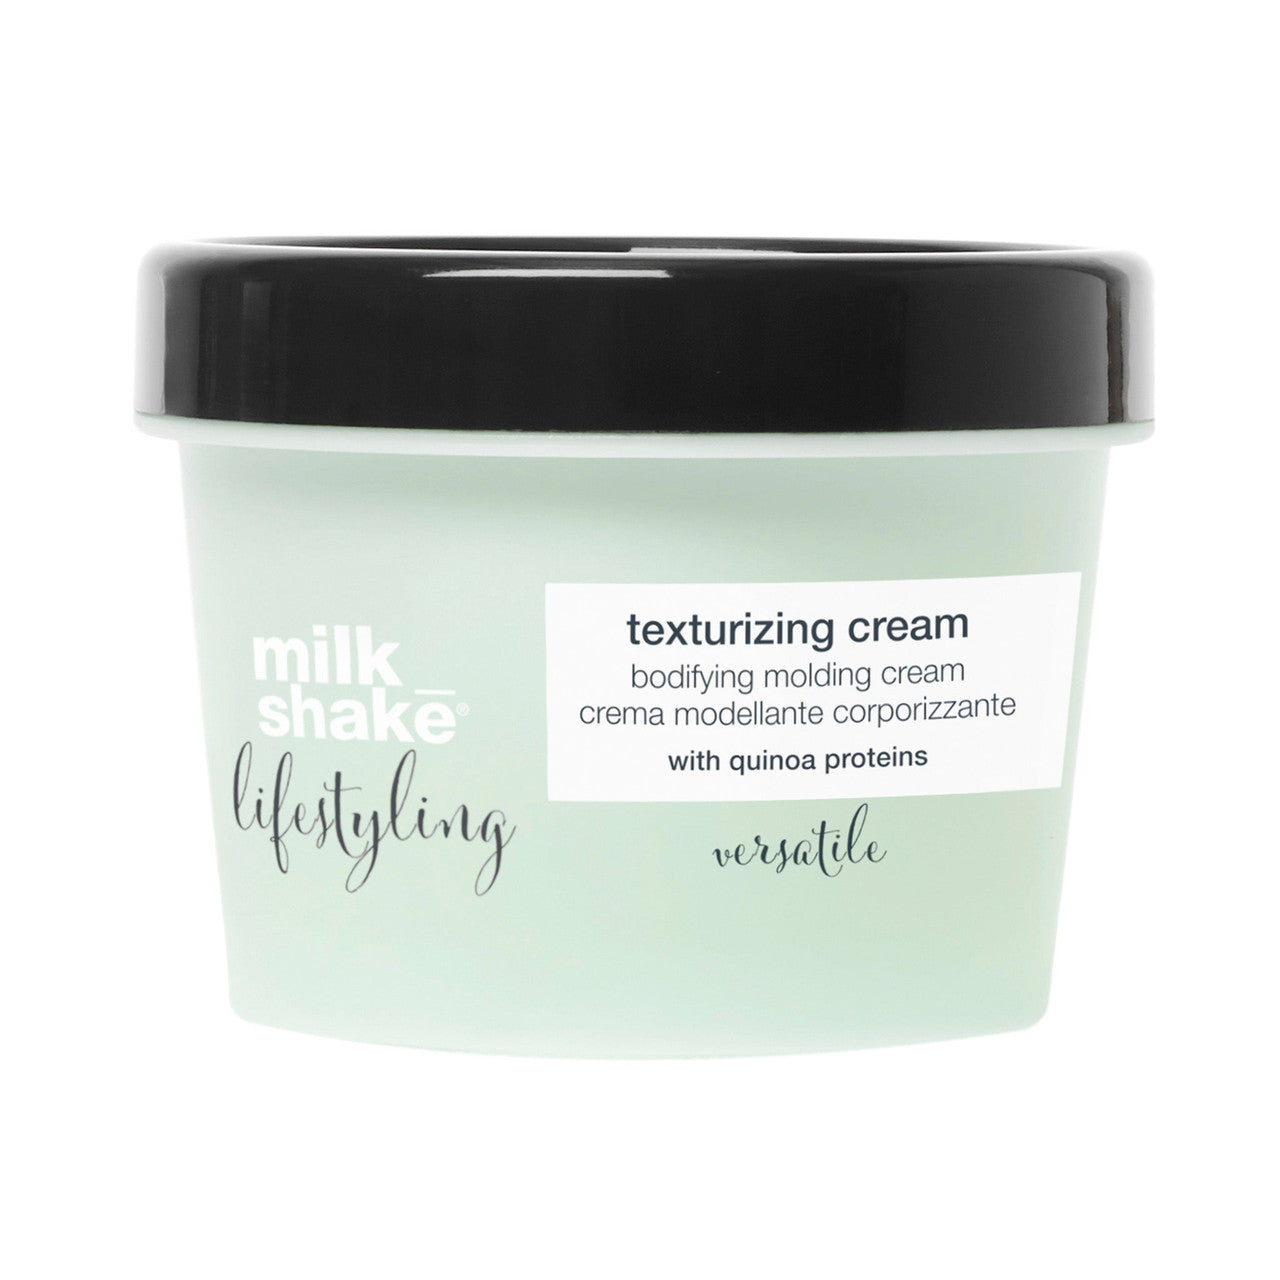 milk_shake® lifestyling texturizing cream is a bodifying molding cream, particularly suitable for fine hair, when applied to dry hair it gives body, giving separation and control to hair strands for creative and unkempt looks. Contains organic fruit extracts, quinoa and milk proteins, Integrity 41® and a UV filter to protect hair.